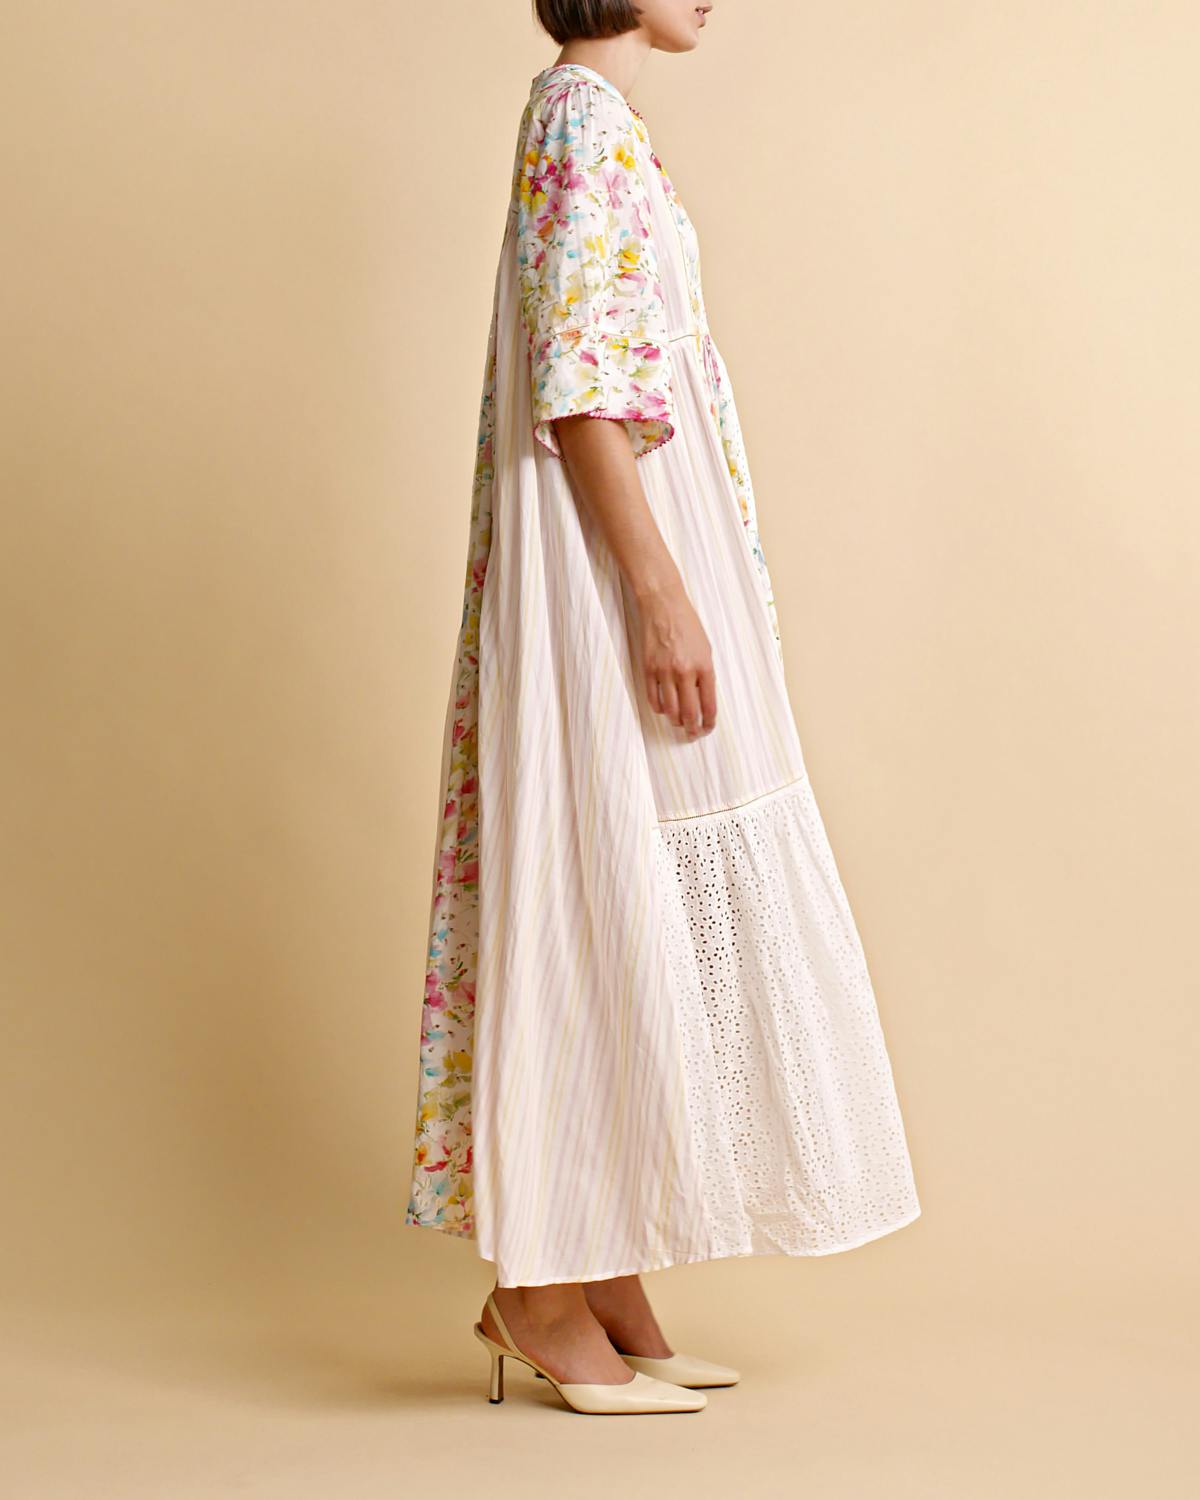 Patchwork Maxi Dress, Bright Flowers. Image #4